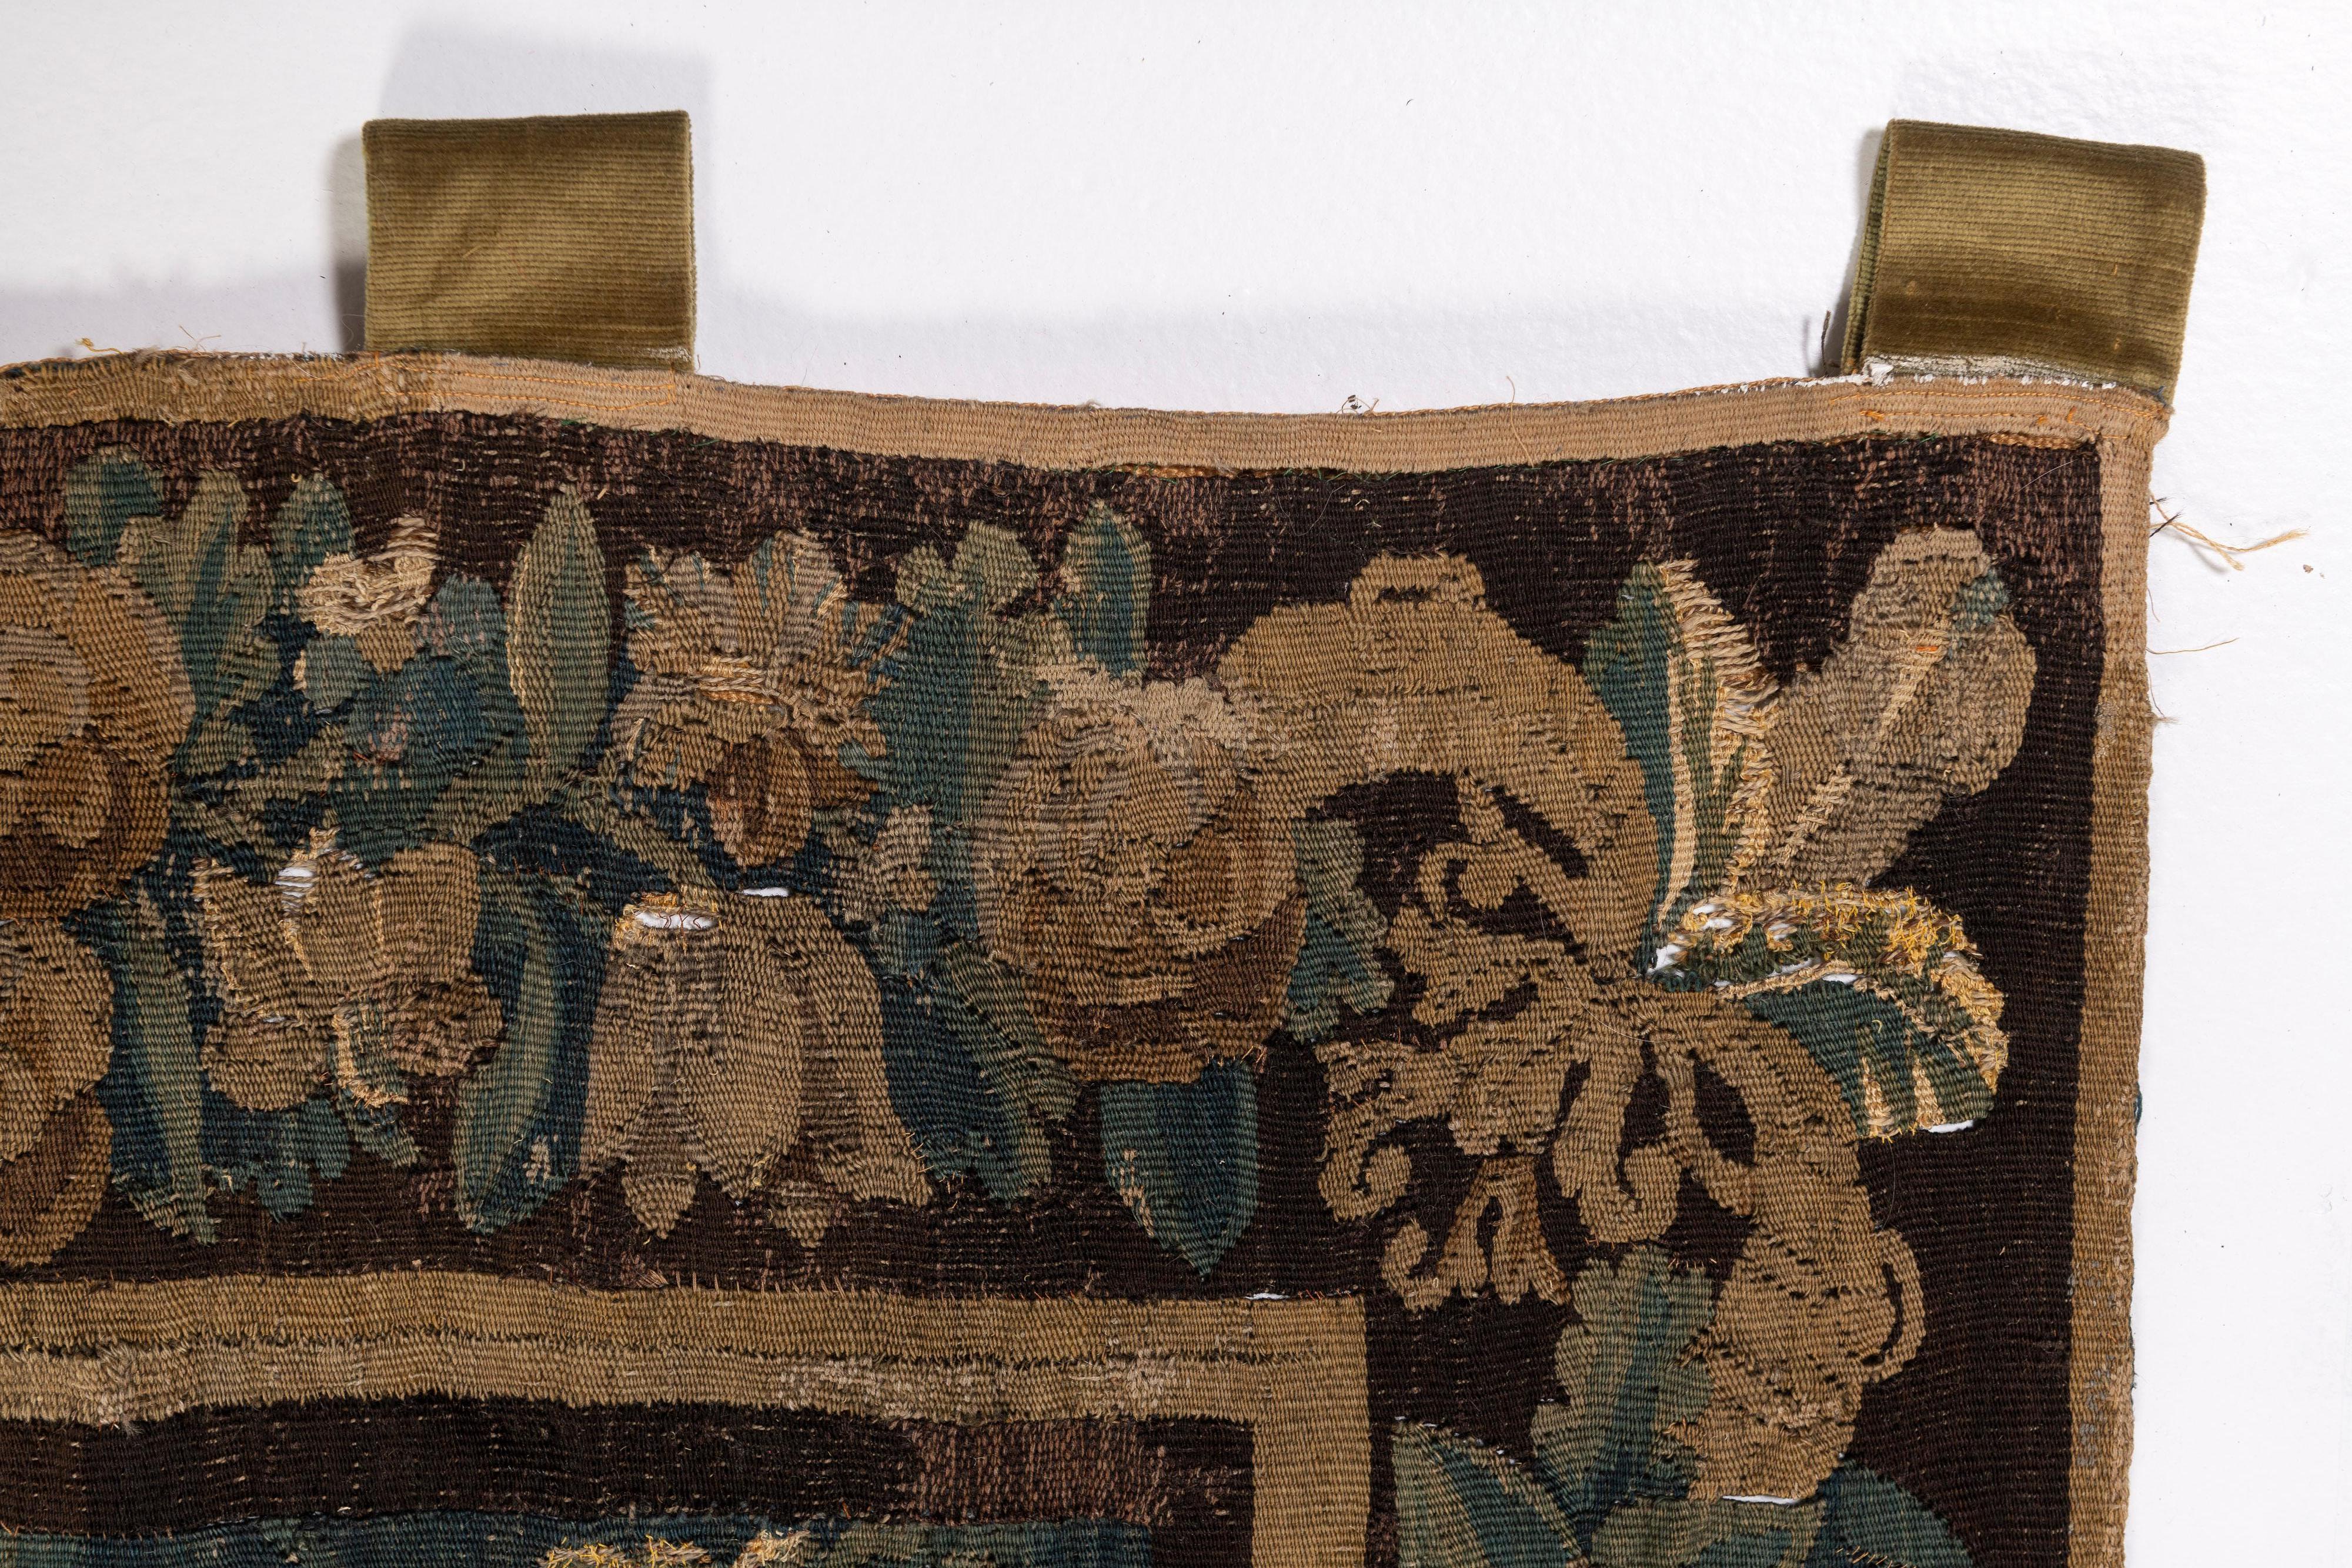 Hand-Woven Antique 17th Century Aubusson Verdure Tapestry, France In Fair Condition For Sale In San Francisco, CA